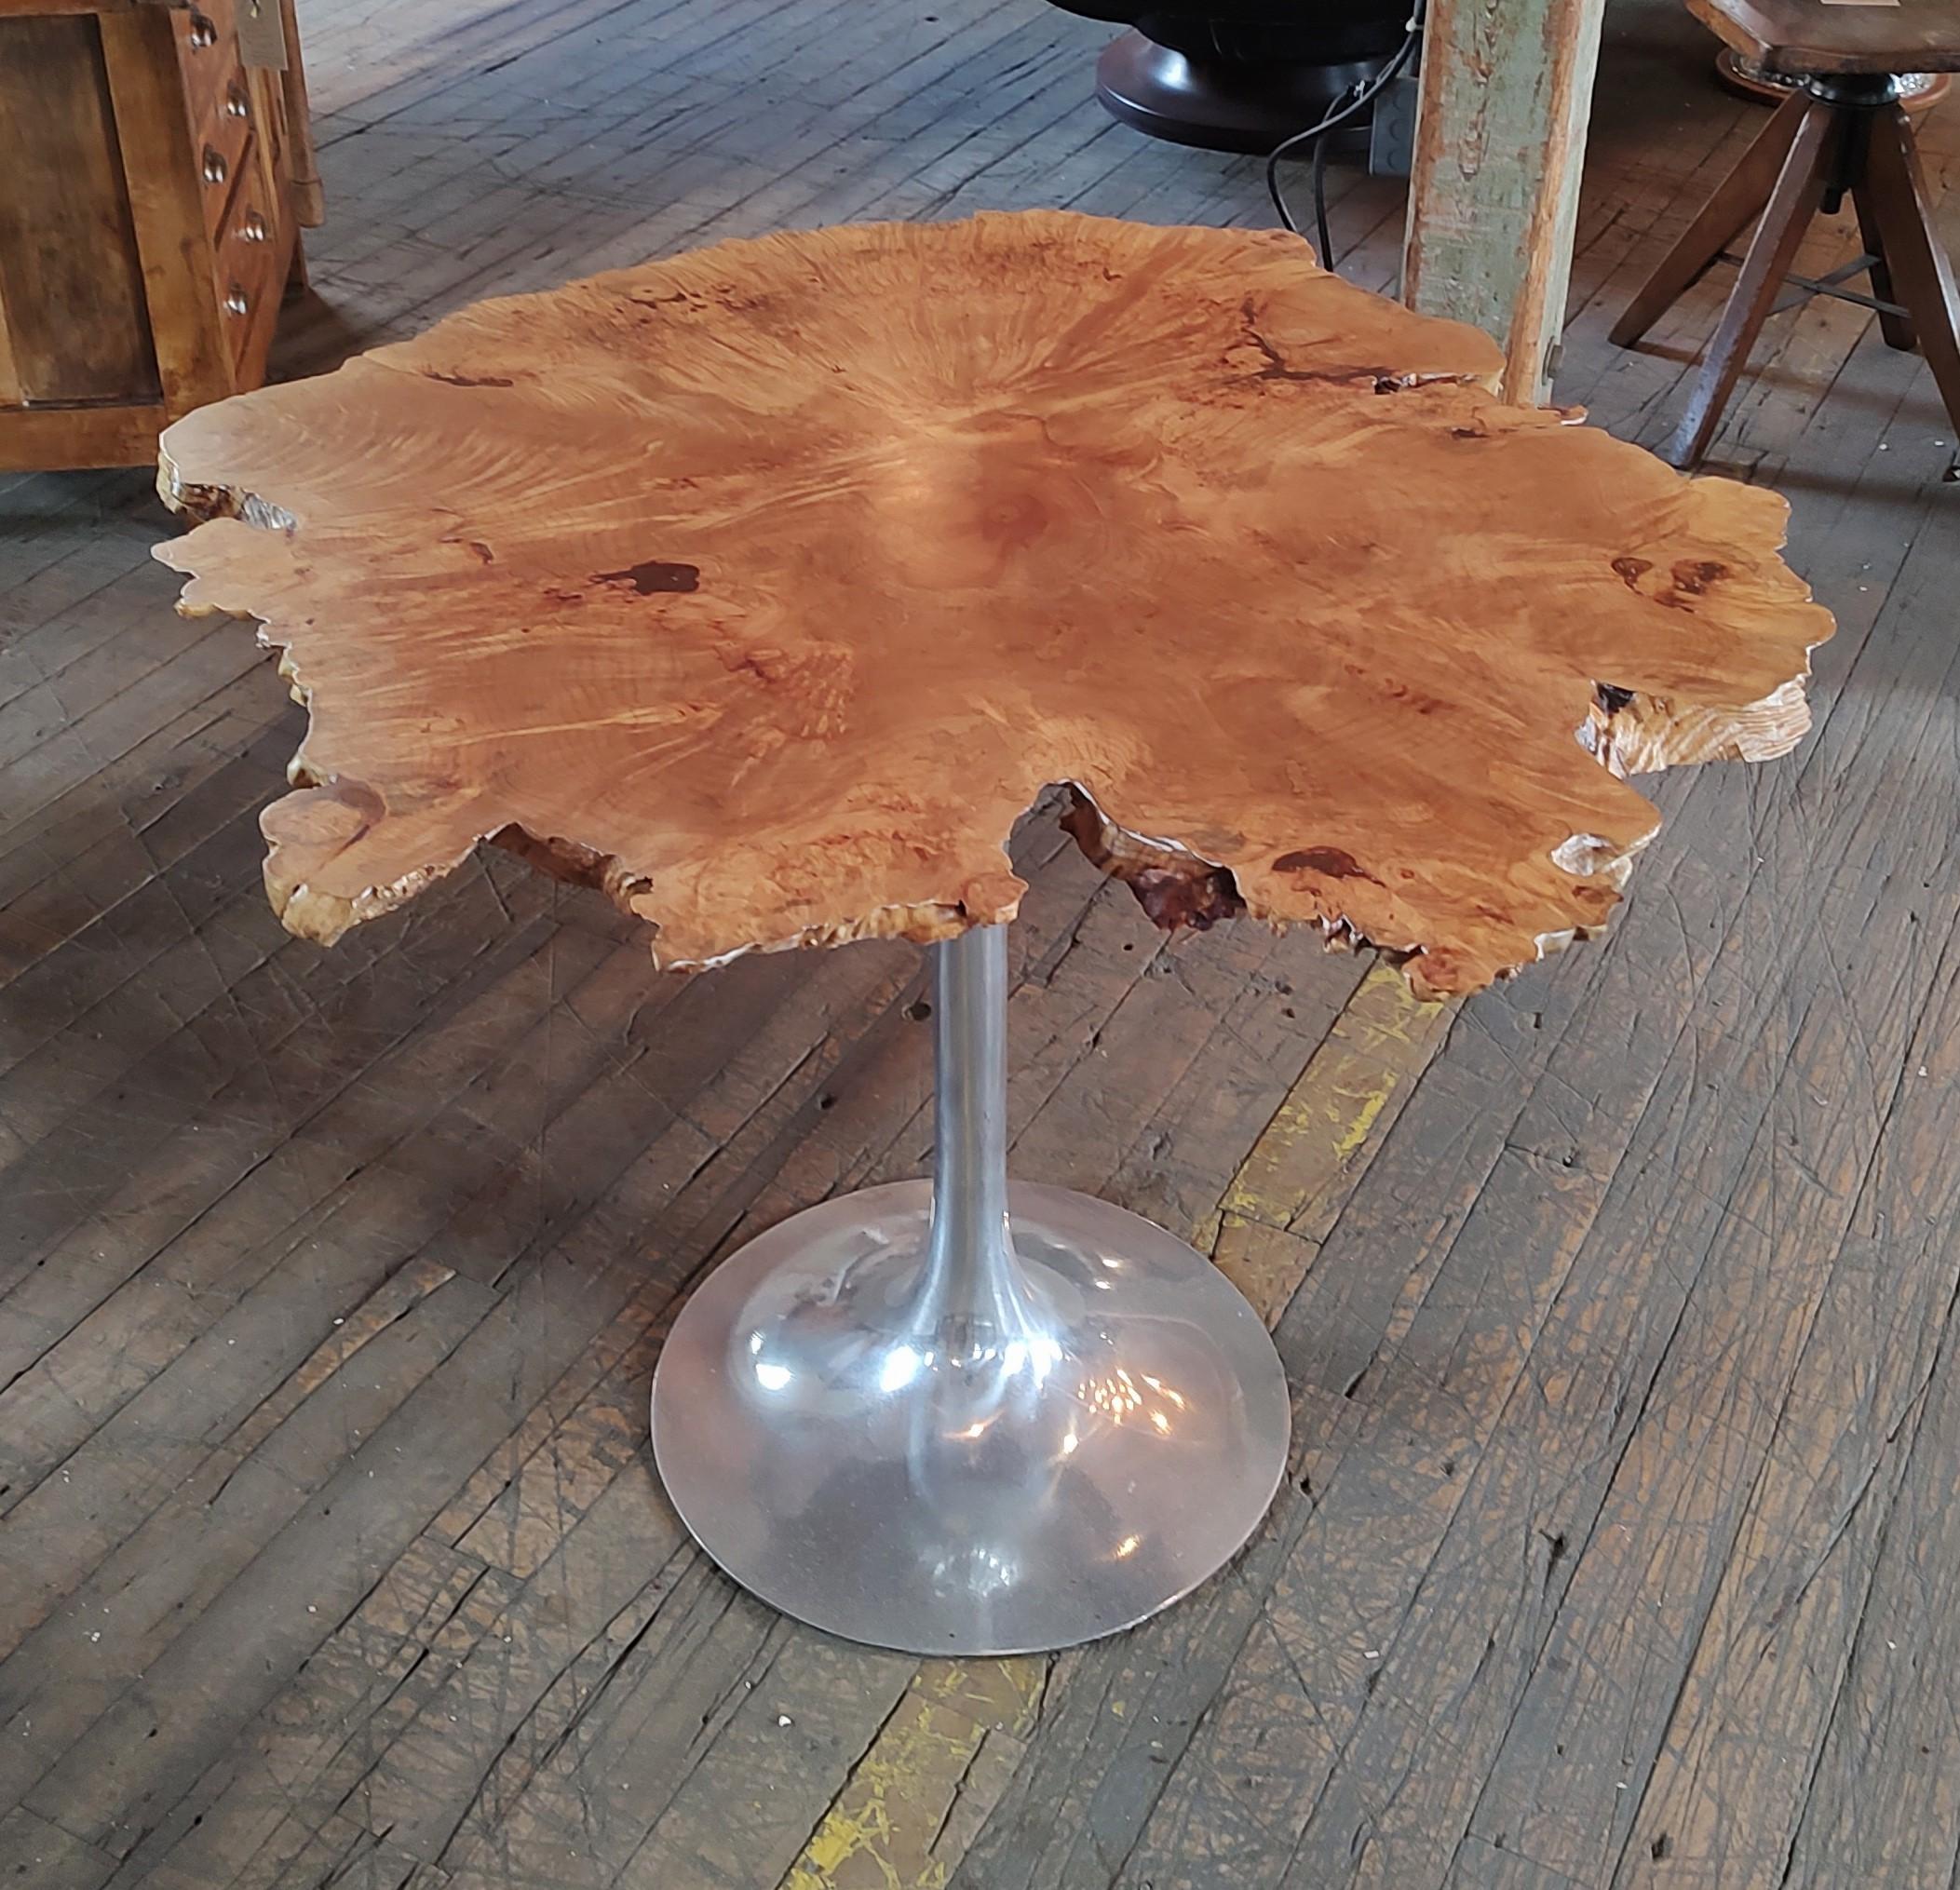 Free Form Live Edge Modern Burl Maple Table with Aluminum Tulip Base

Overall Dimensions: 40